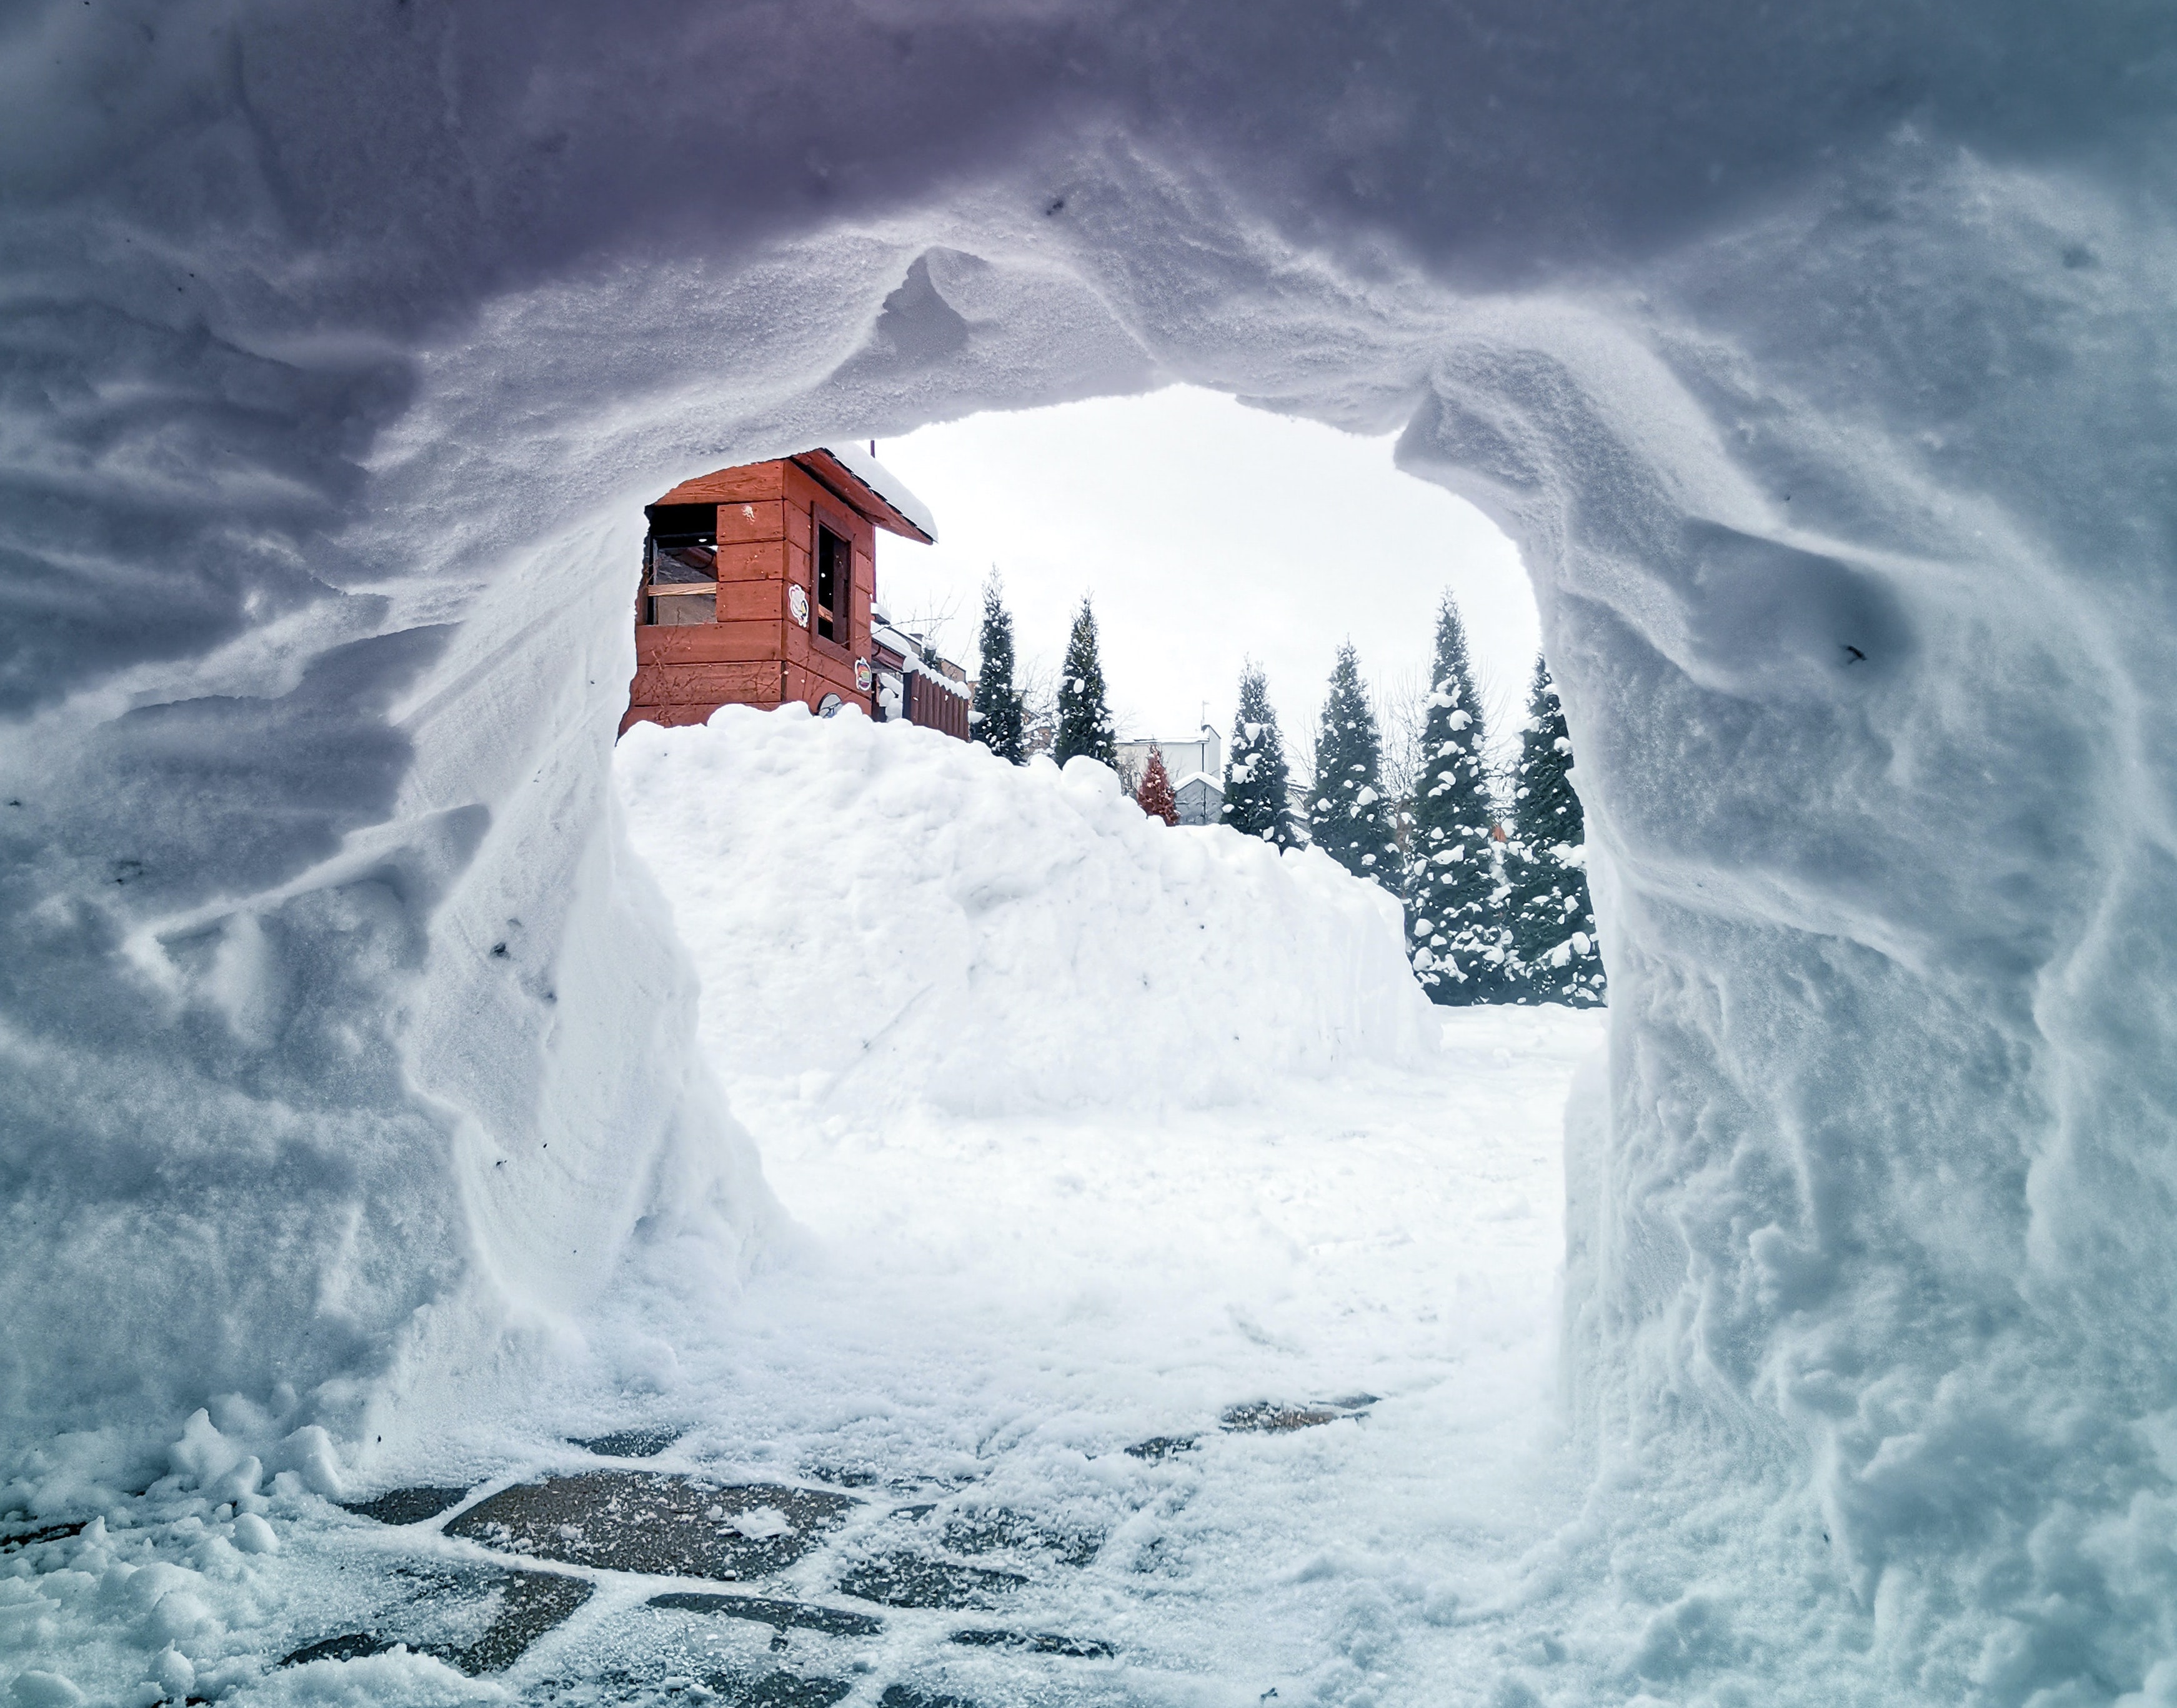 Building an igloo campspace